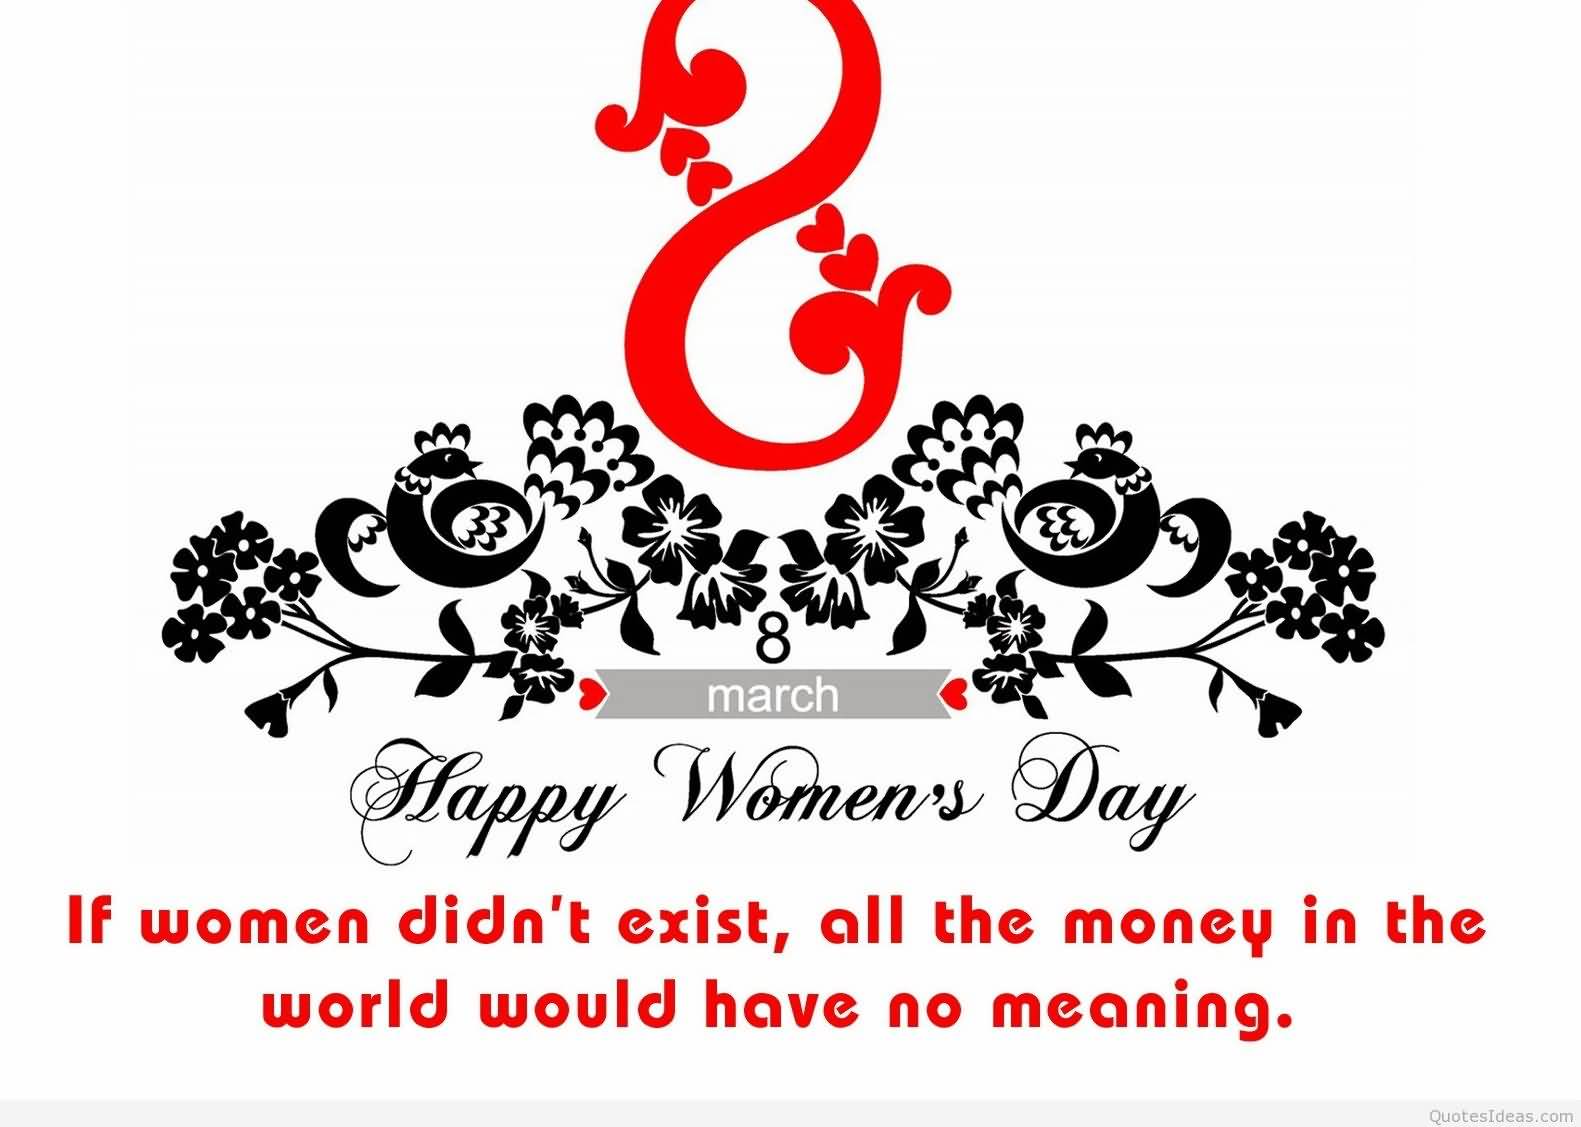 Happy Women’s Day If Women Didn’t Exist, All The Money In The World Would Have No Meaning